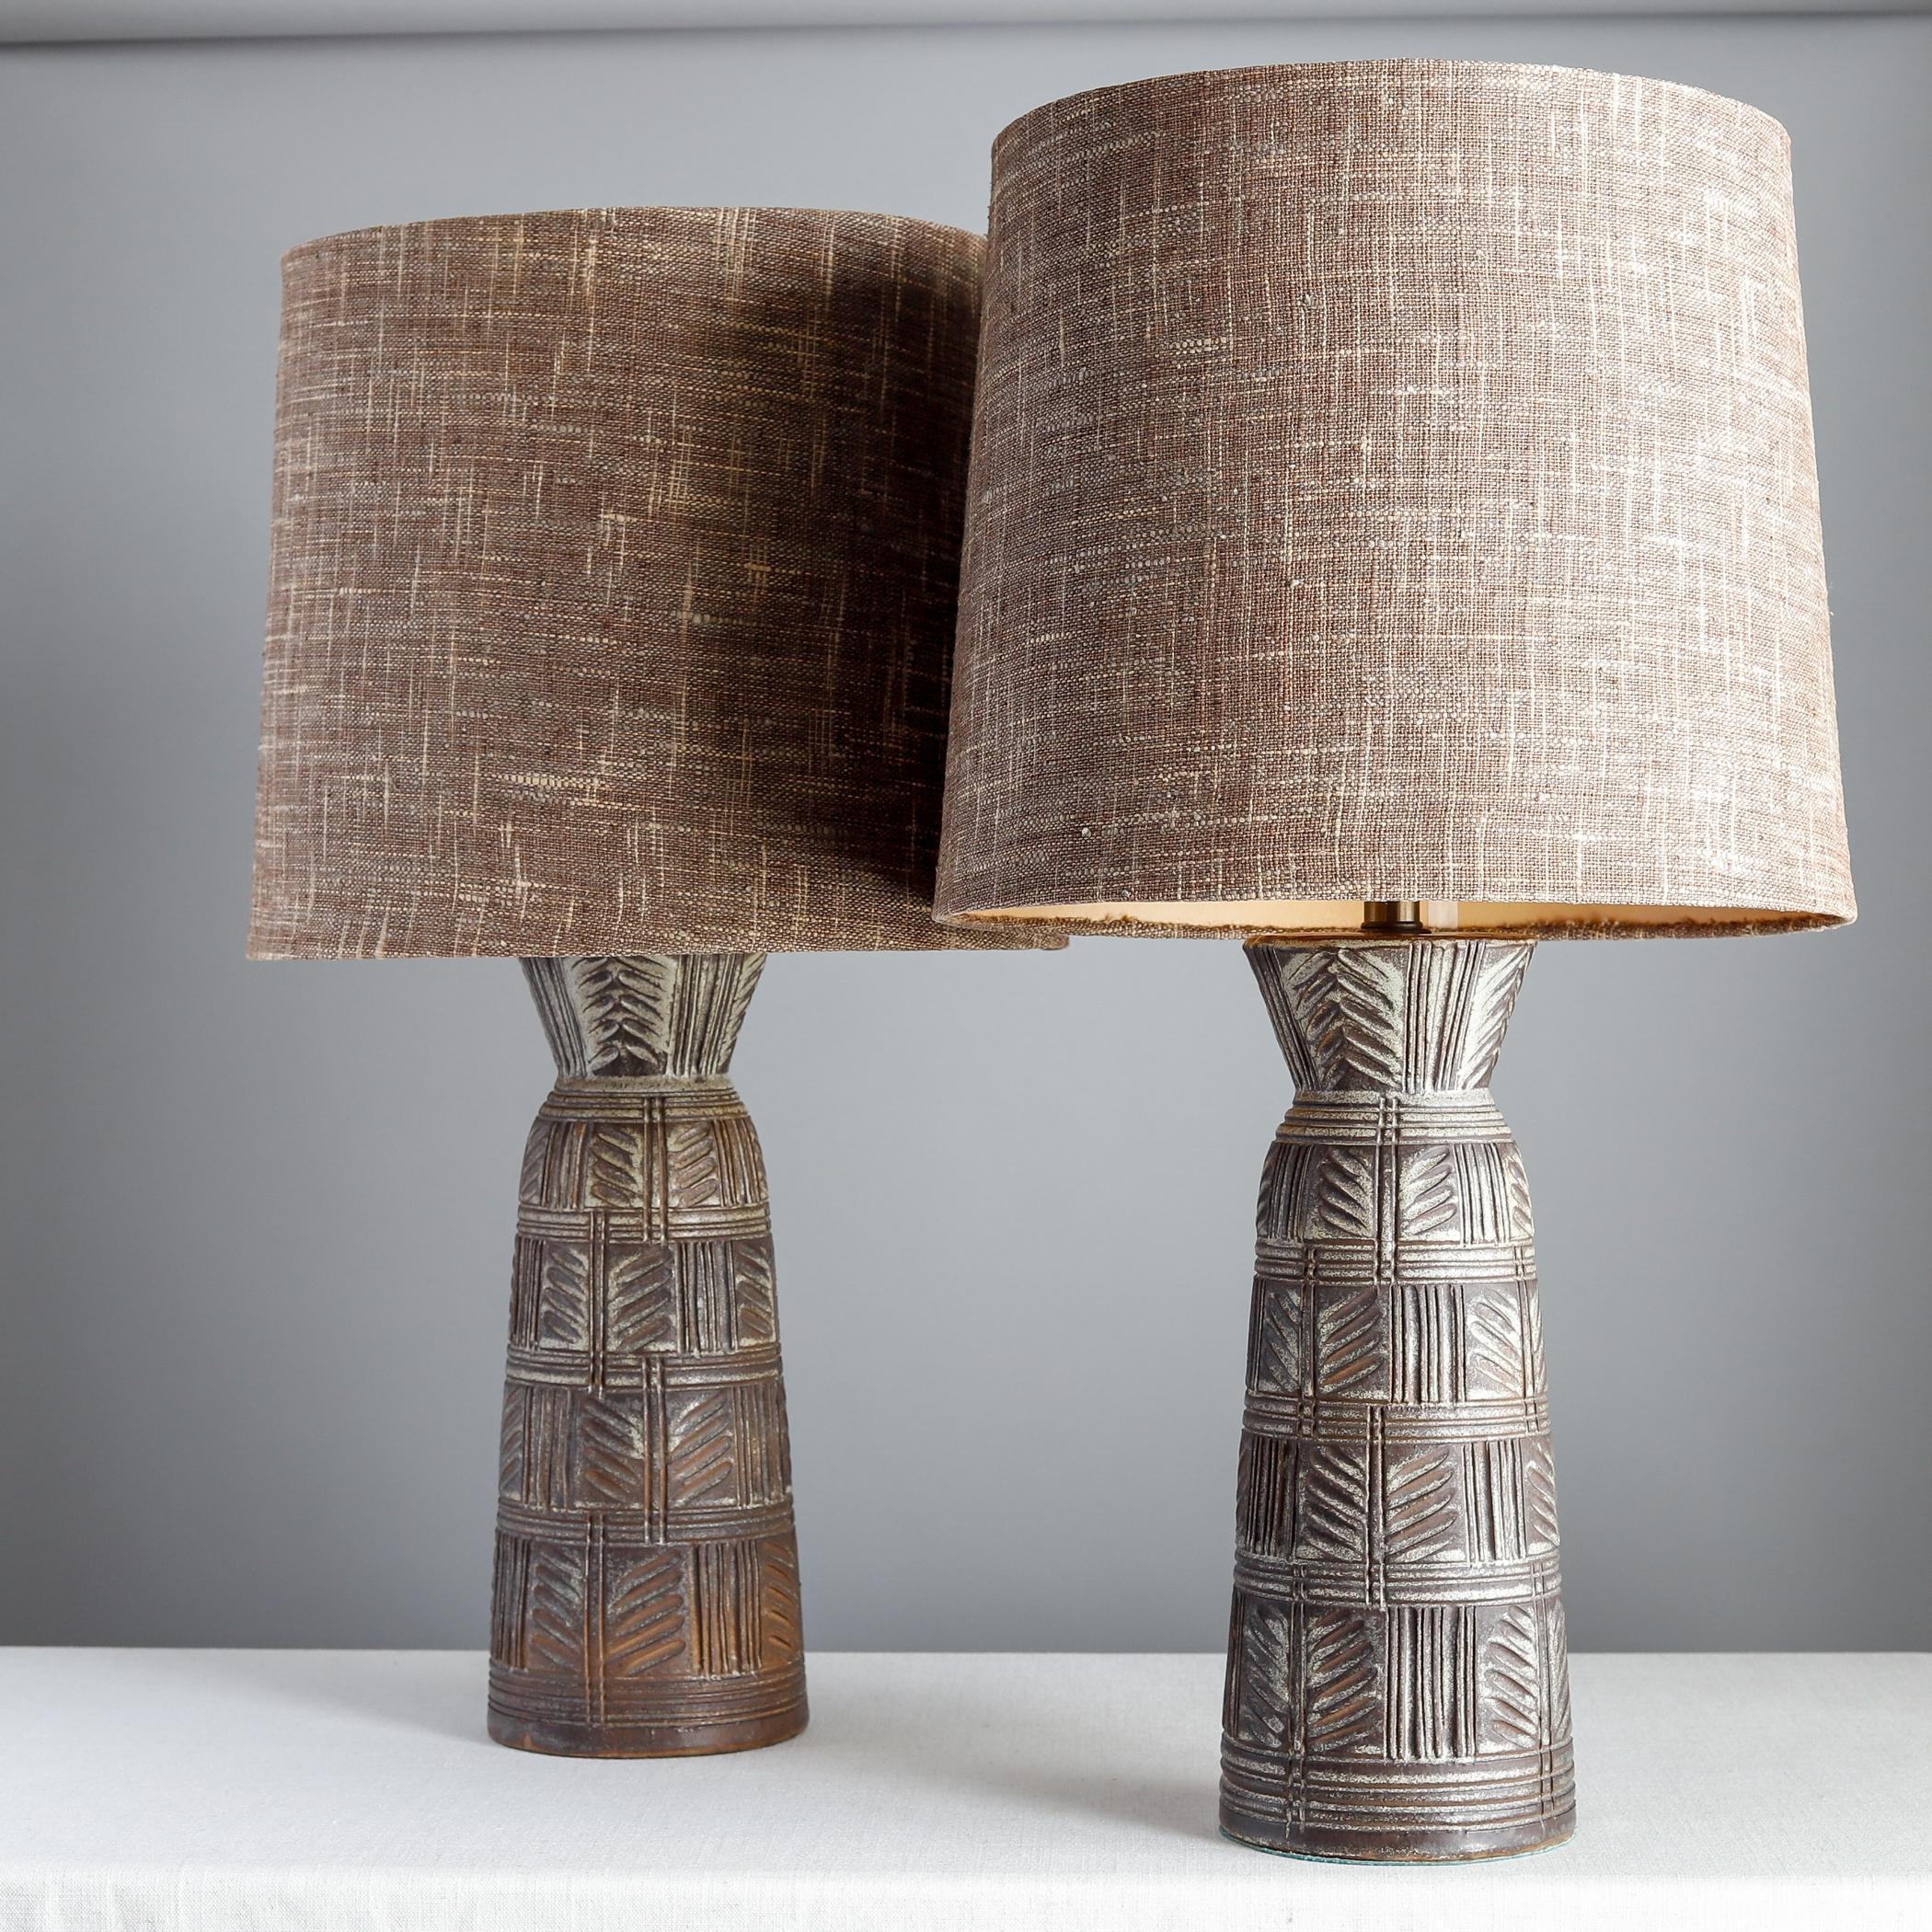 Pair of large ceramic lamps designed by Lee Rosen for Design Technics of Stroudsburg, PA. Each base has a distinctive carved design and dates to the 1950s. Includes original milk glass shades and brown fabric-covered paper shades. Original wiring.